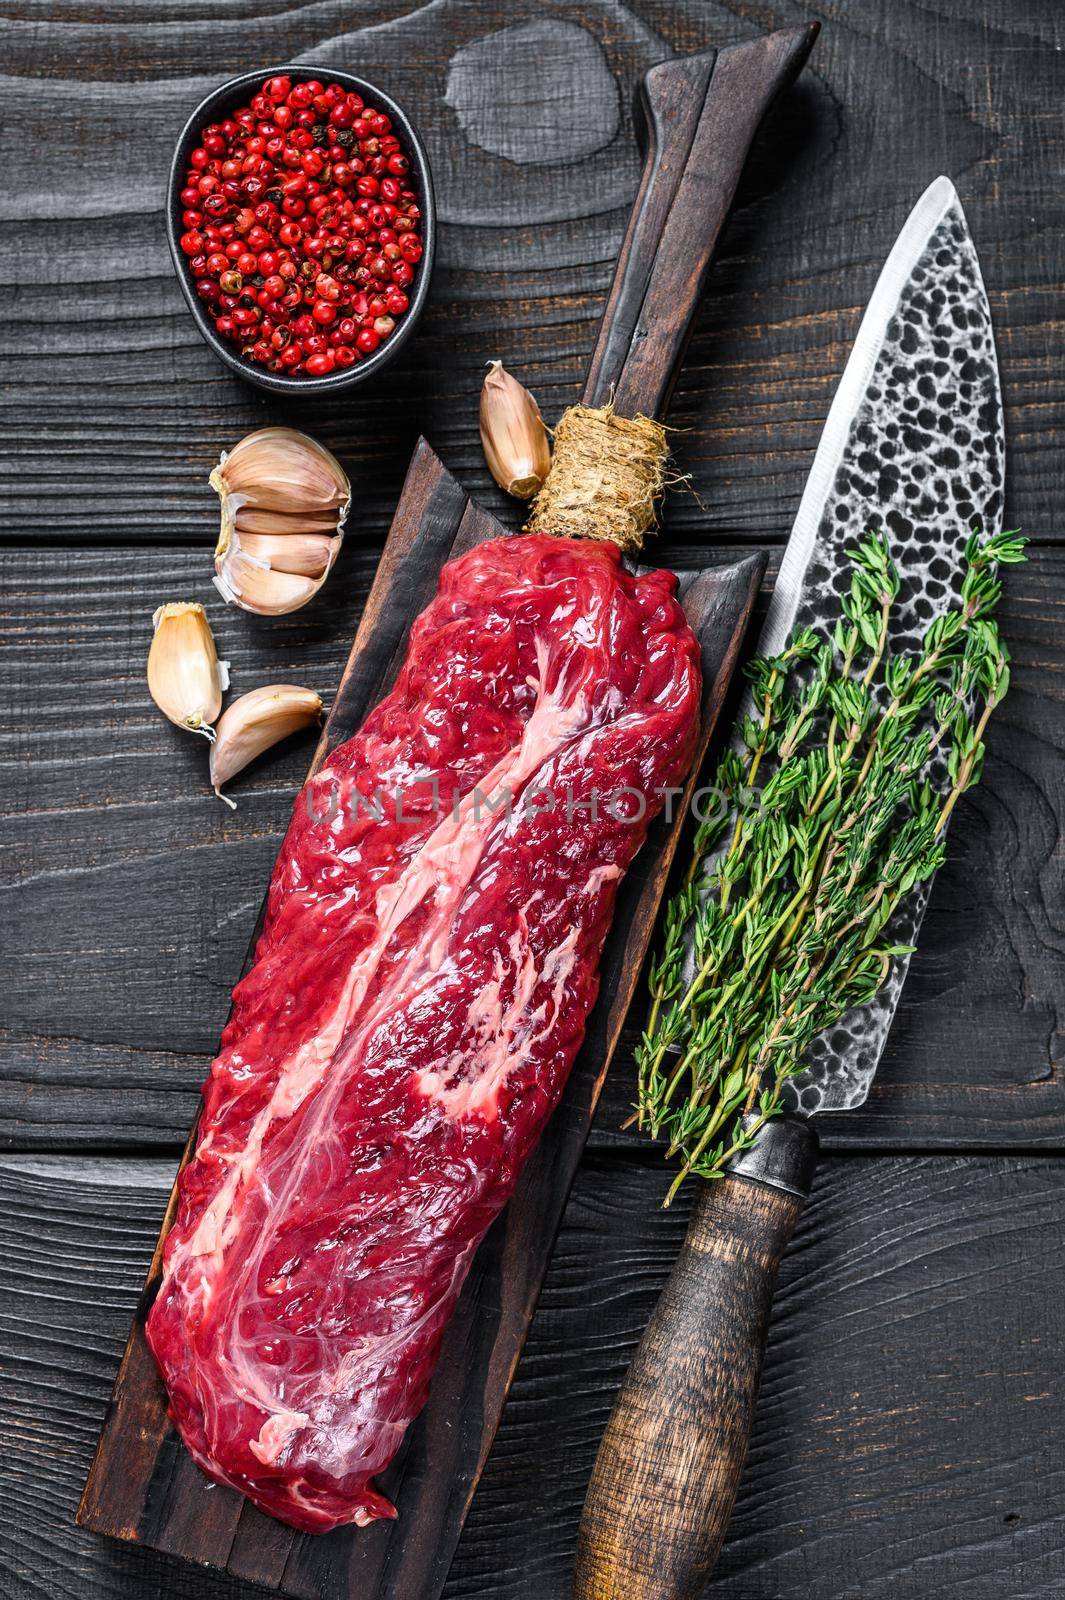 Raw Onglet Hanging Tender beef meat steak on a wooden cutting board. Black wooden background. Top view.